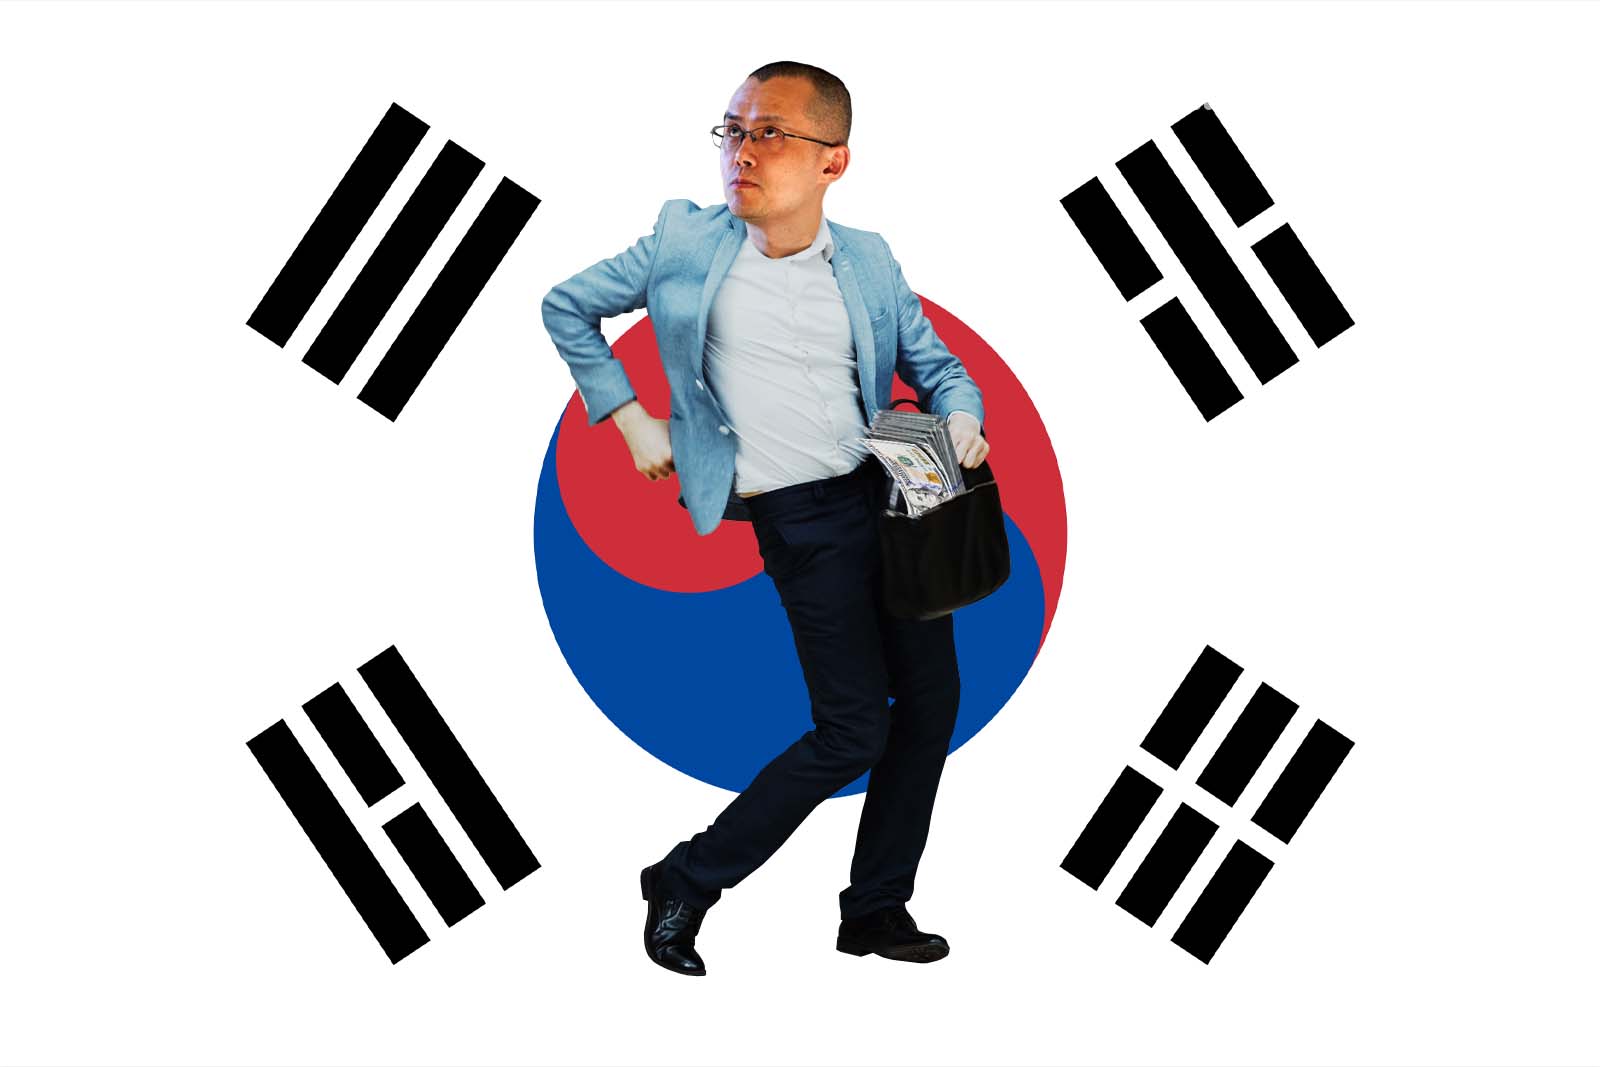 Binance CEO dancing with South Korean flag at the back.